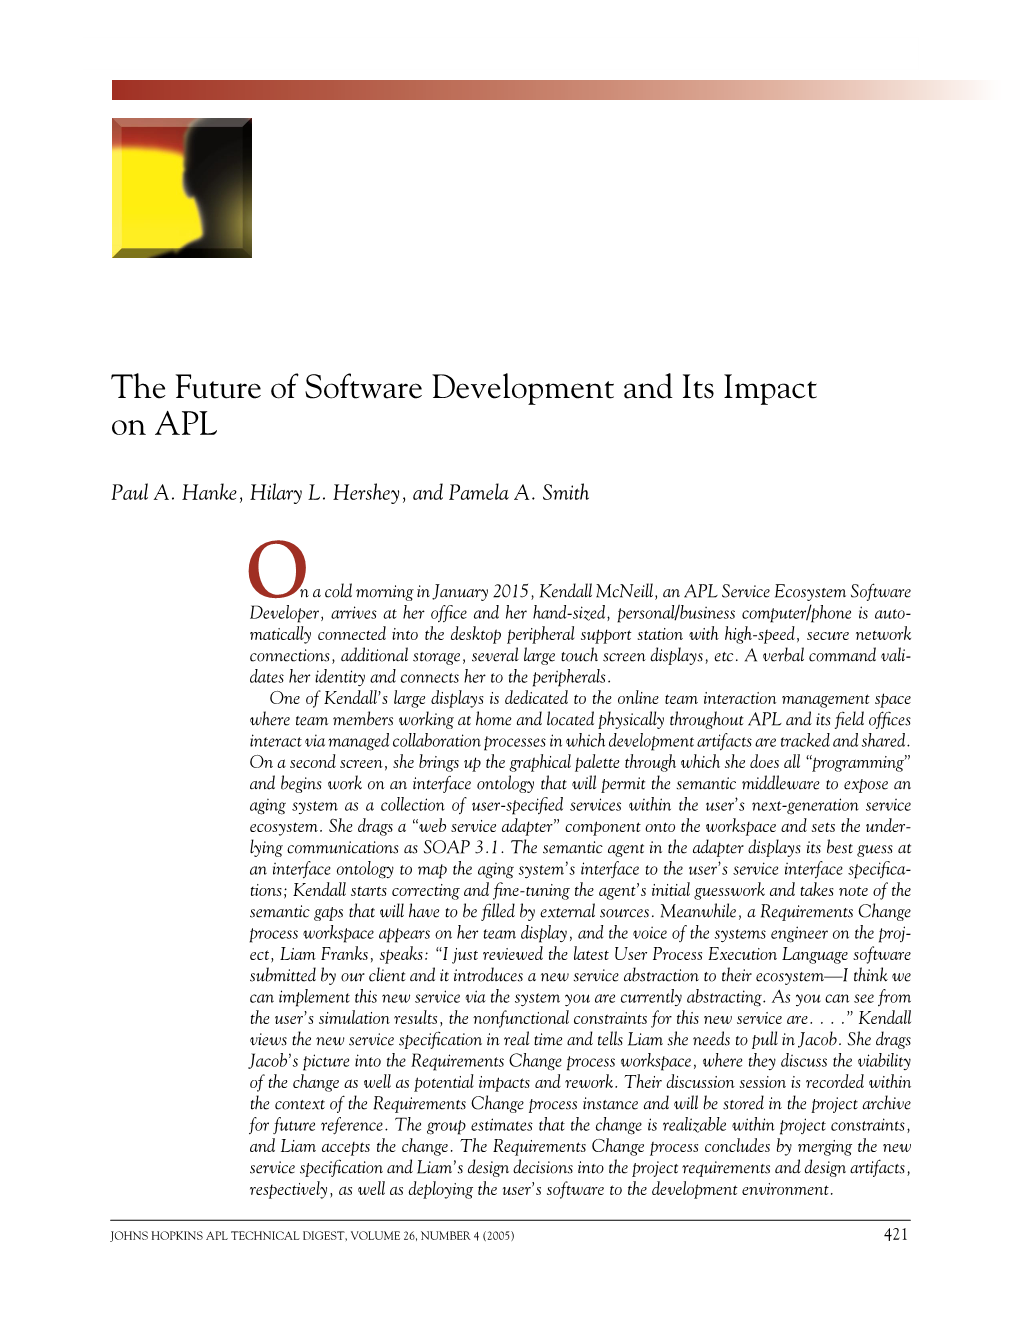 The Future of Software Development and Its Impact on Apl